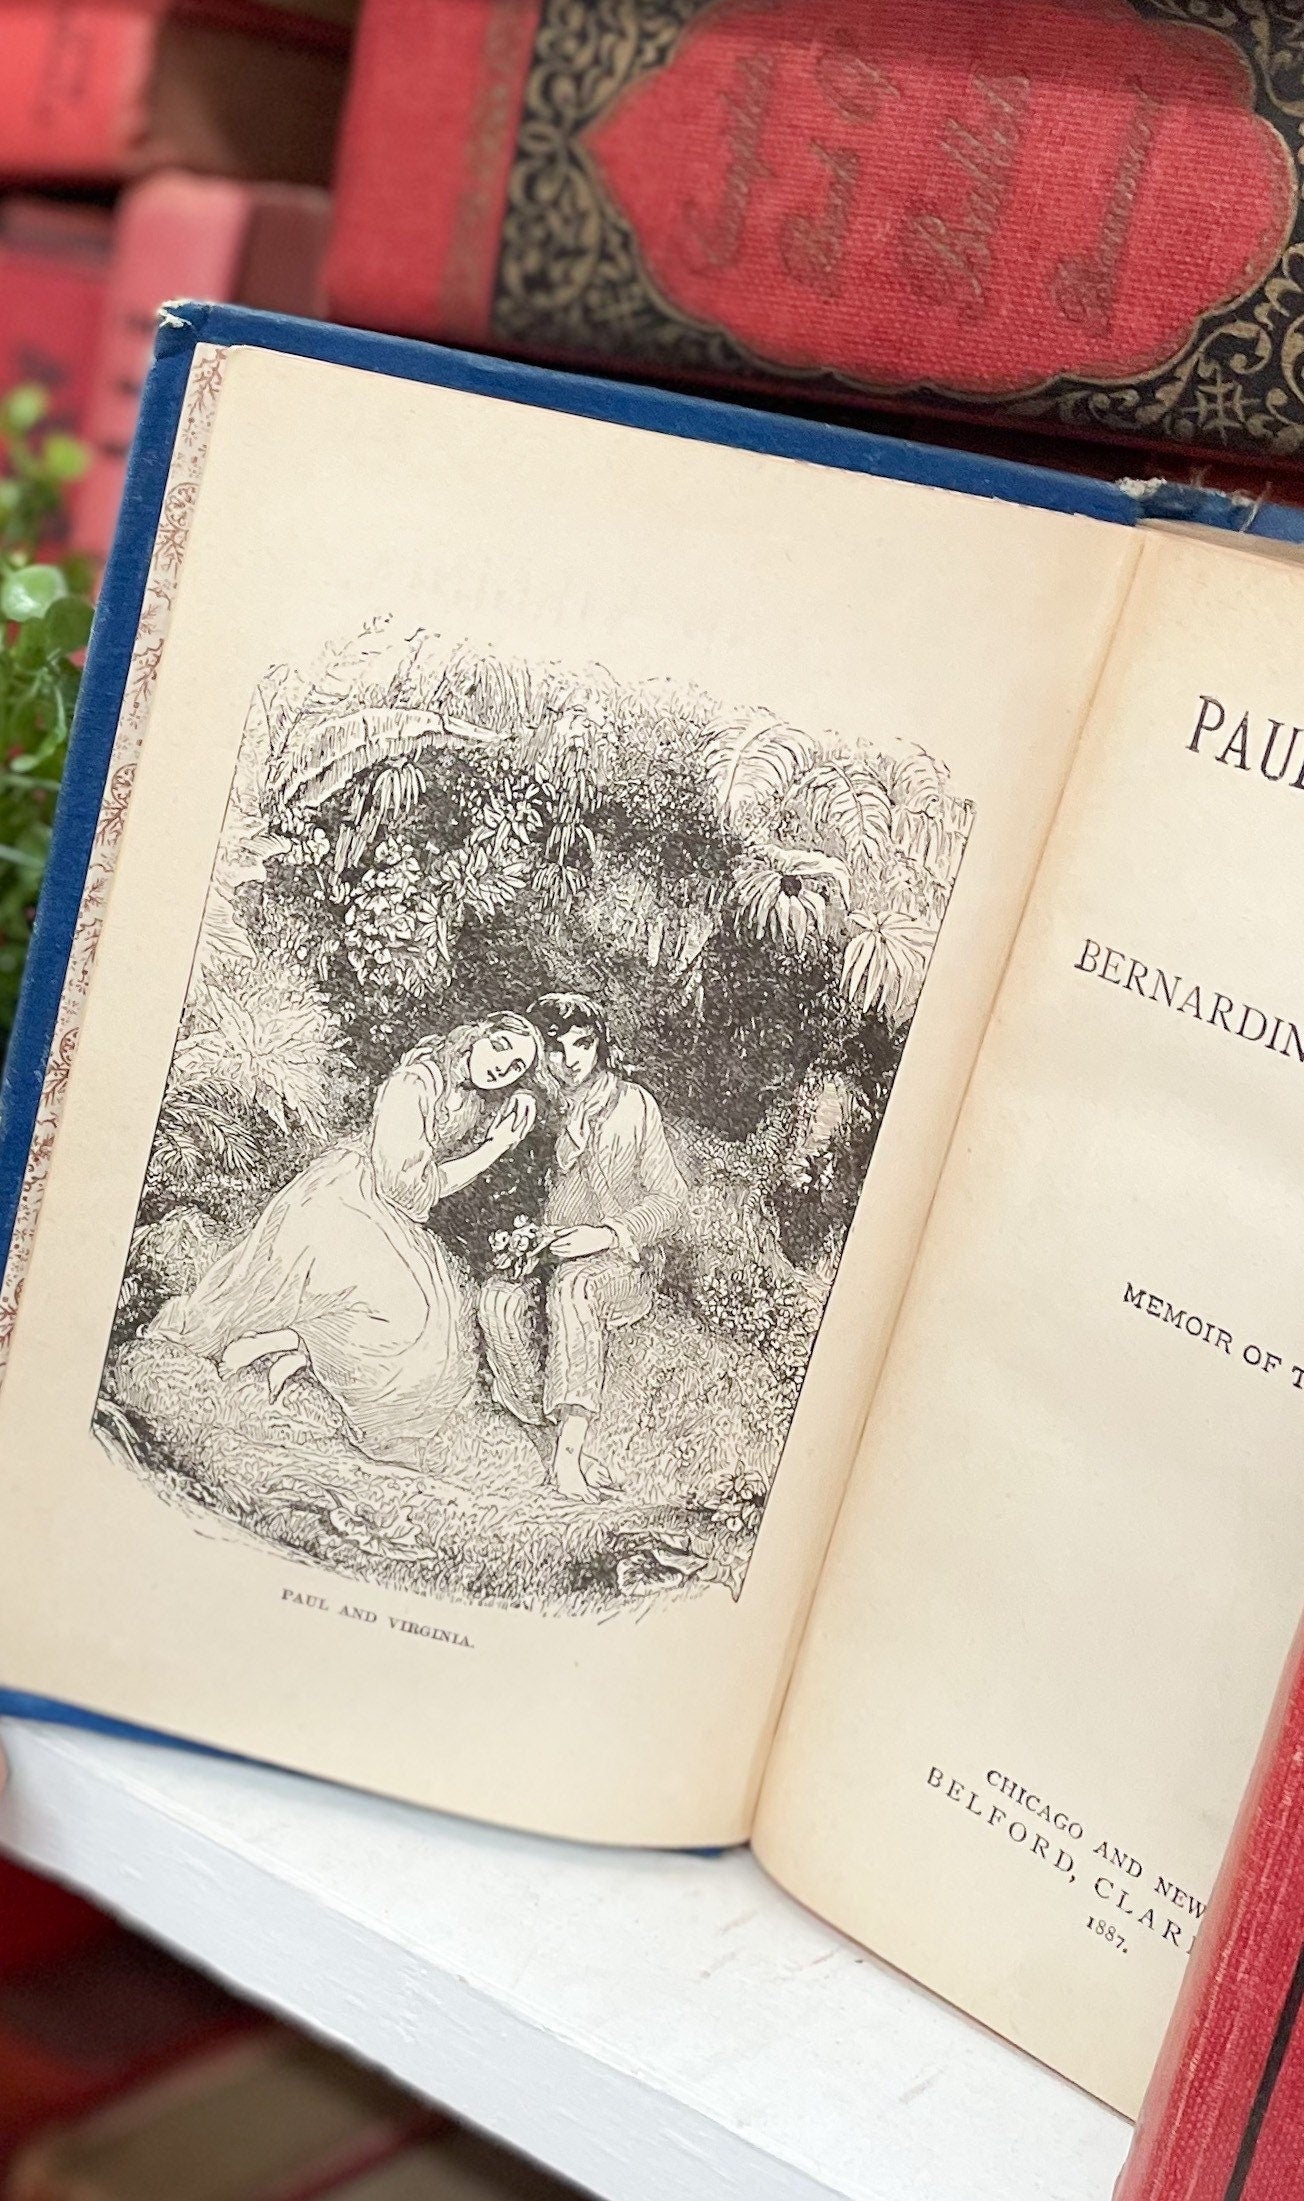 Beautiful Two-In-One Novels, Paul and Virginia by Bernardin De St. Pierre and The Vicar of Wakefield by Oliver Goldsmith